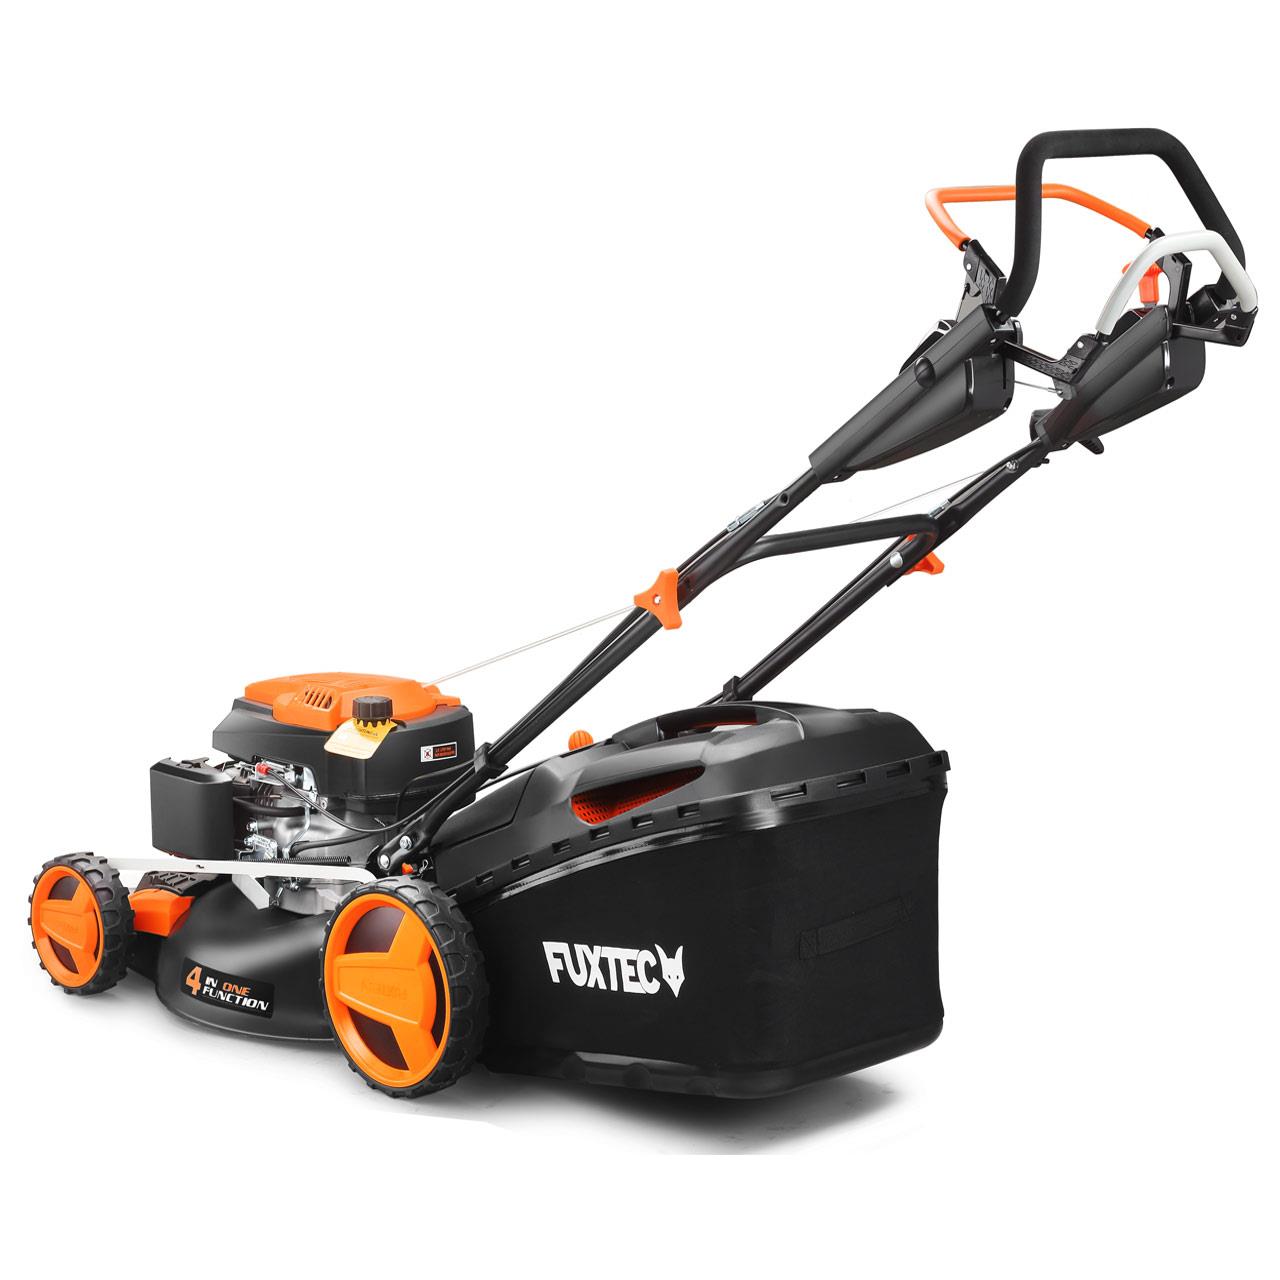 FUXTEC petrol 196cc self-propelled lawnmower 6HP - 501mm cutting width 4in1 mulching, side-discharge, 60l grass collector - RM5196PRO